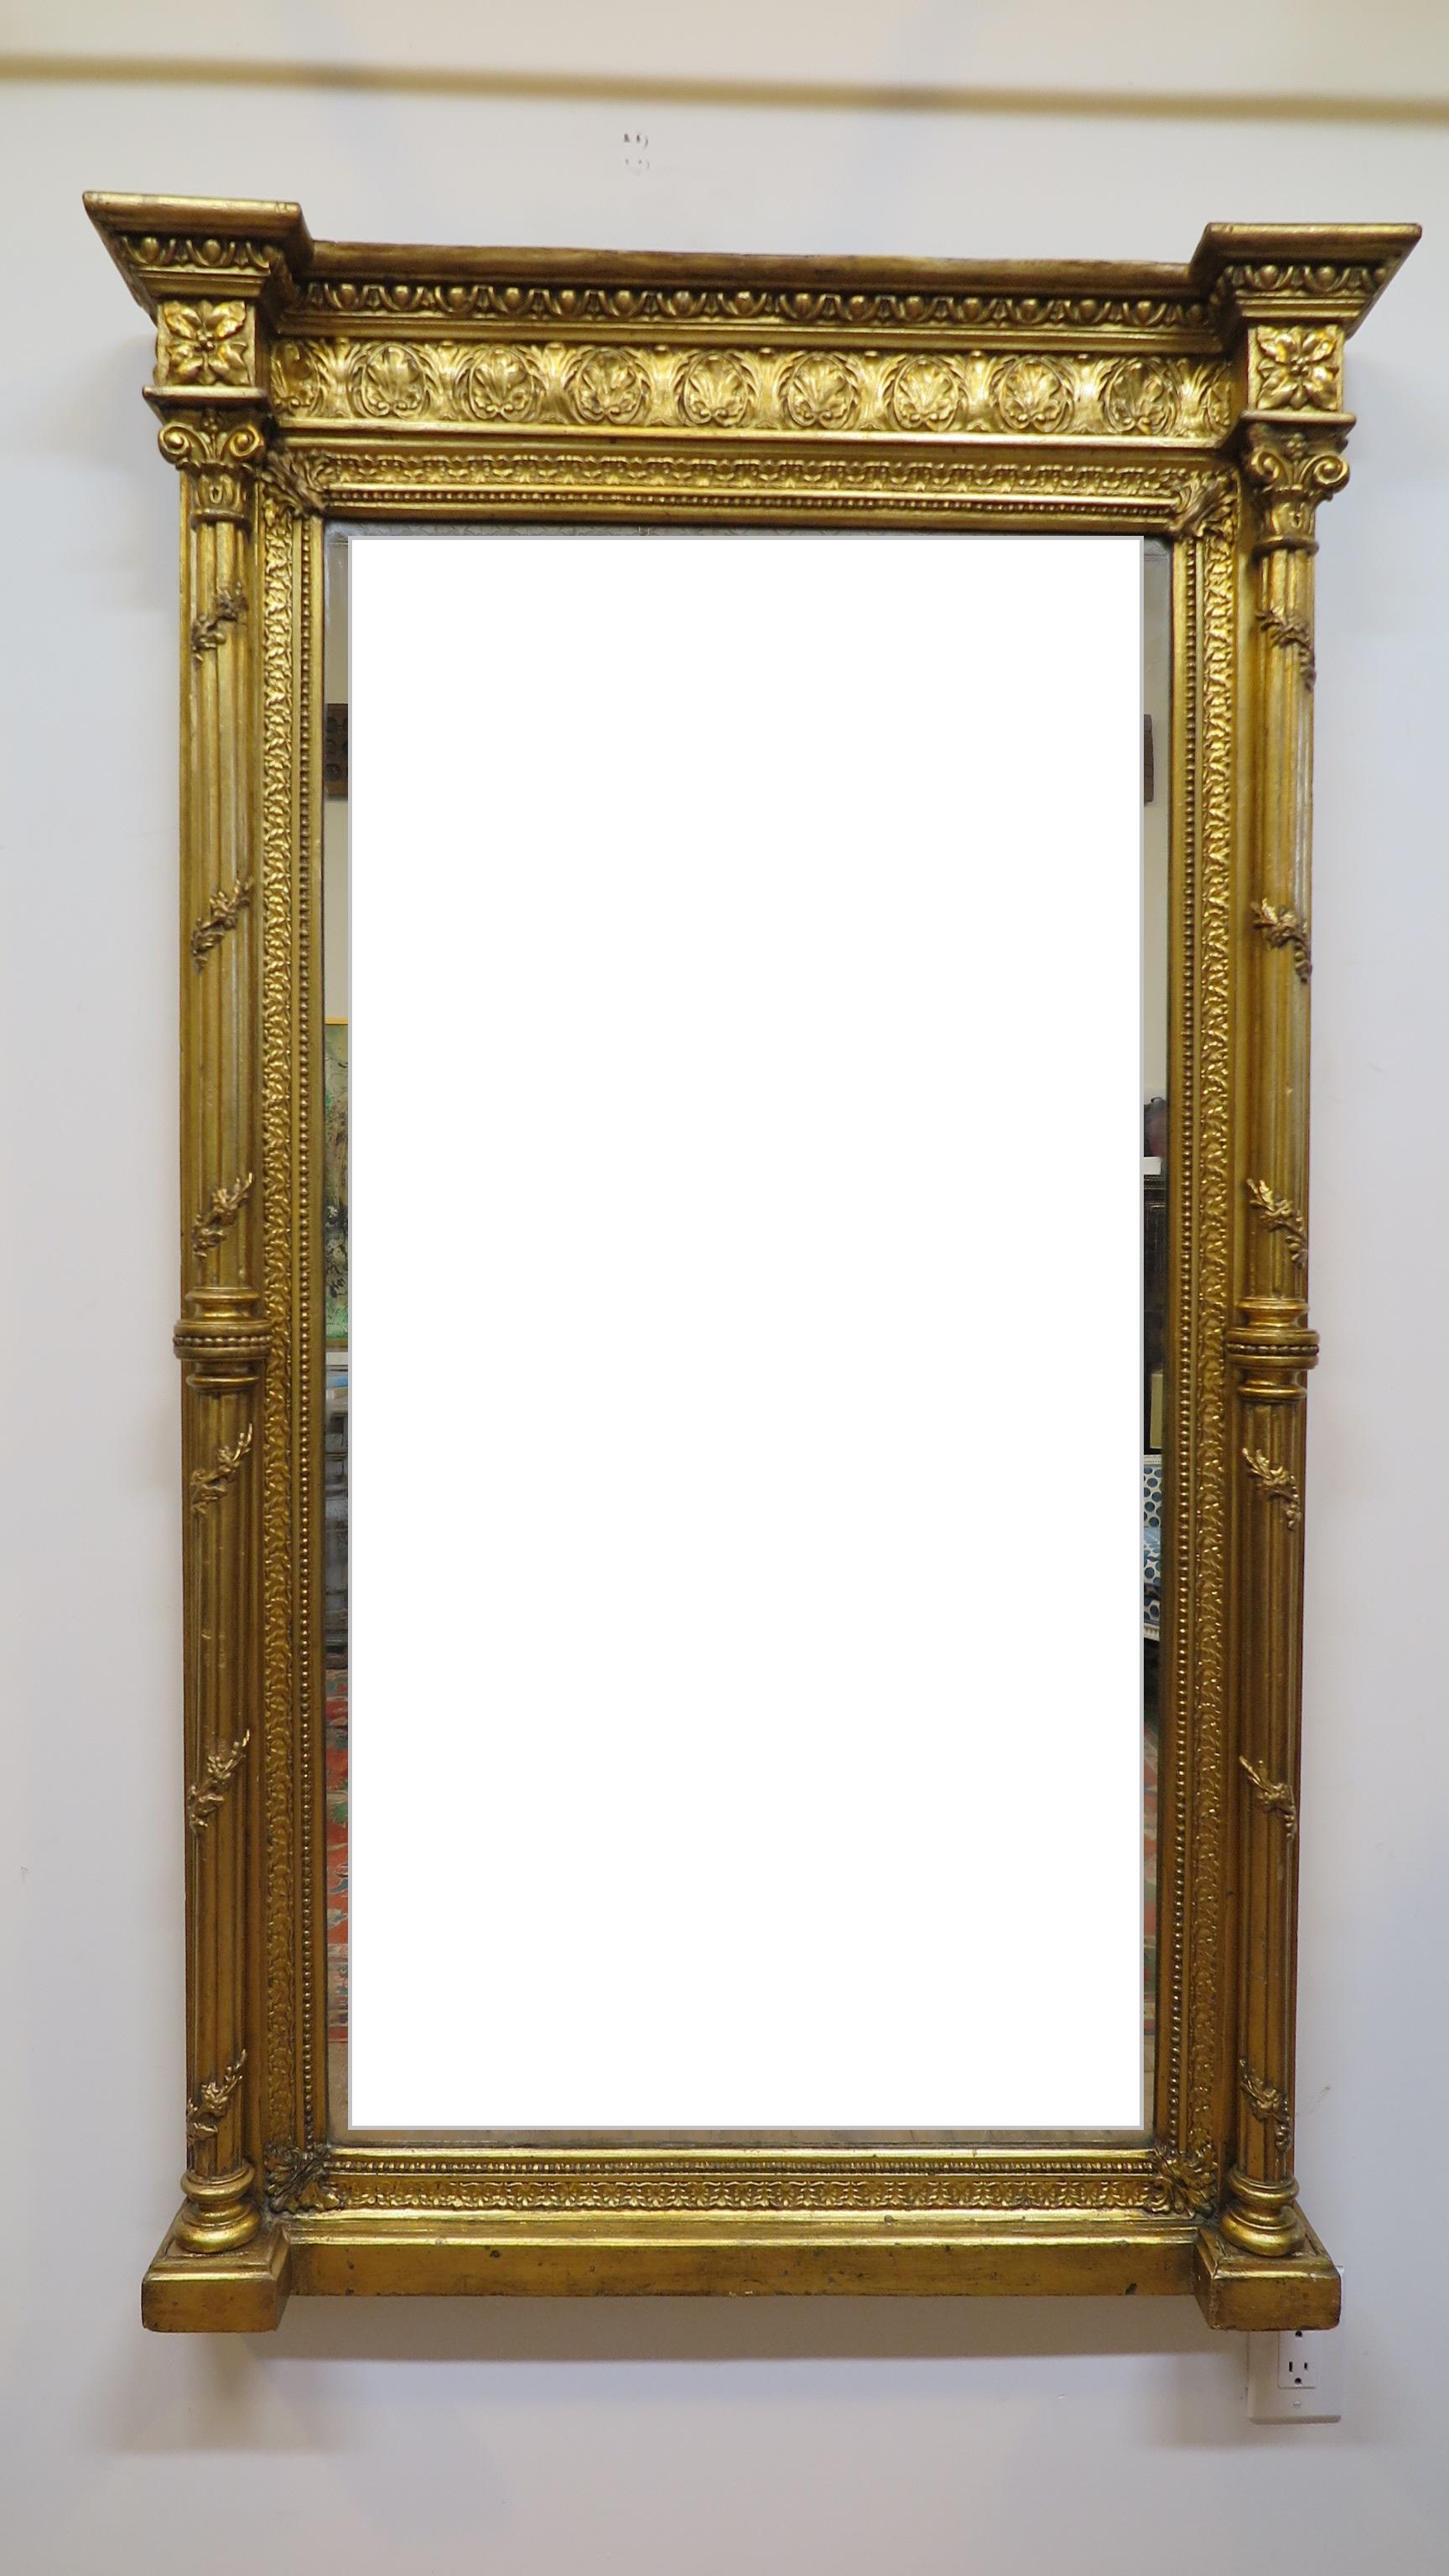 19th century French Empire carved gilt mirror. Corinthian columns with scroll vines flank the sides with leaf medallion motif across the top. Original glass with some touch up to the gilding. Good overall condition. Beautiful gilding work. France,